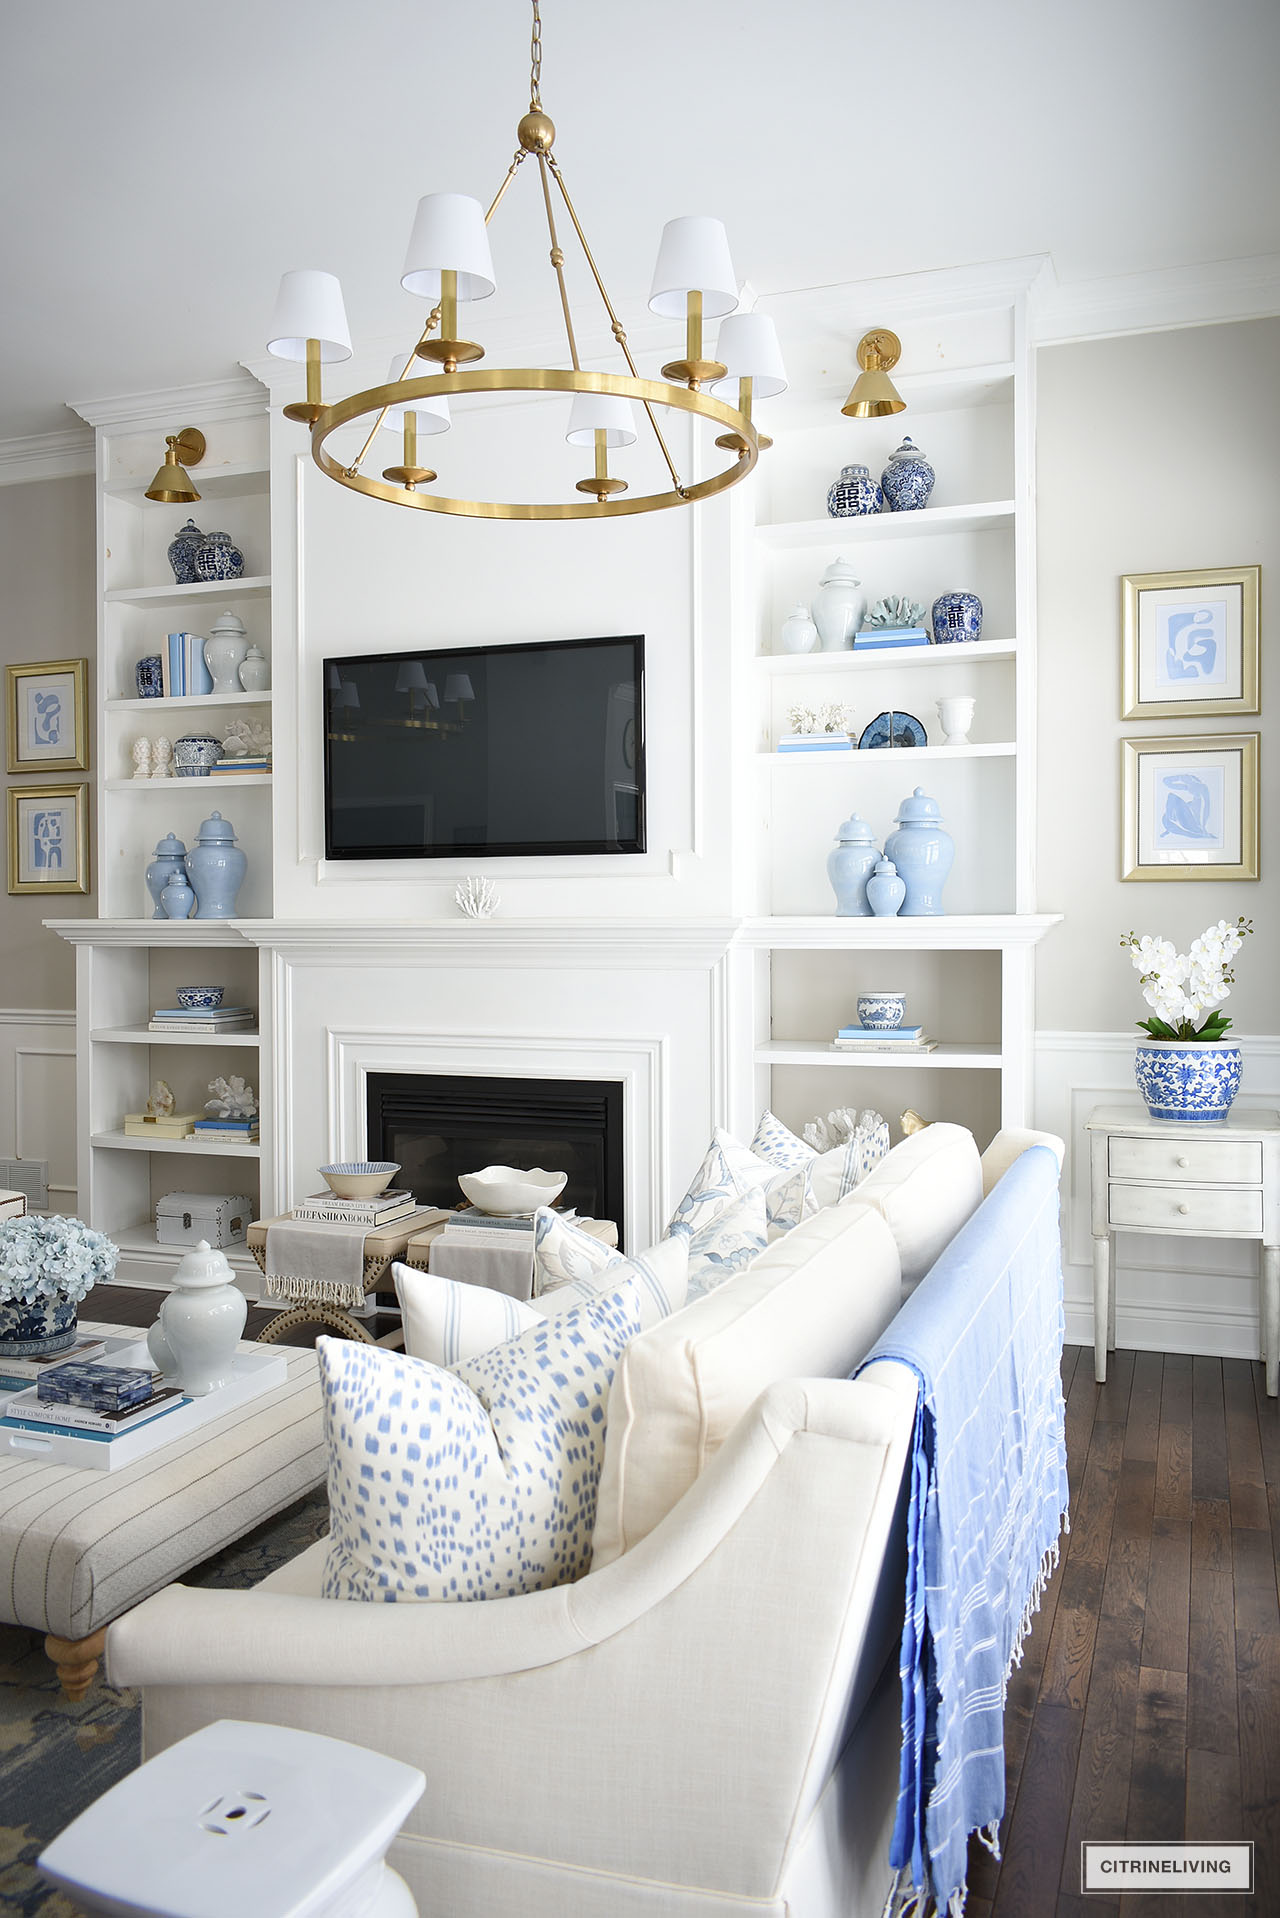 Gorgeous living room spring decor and bookshelves dressed in a collection of blue and white ginger jars, collared books, coral sculptures and objects, styled with a curated look.